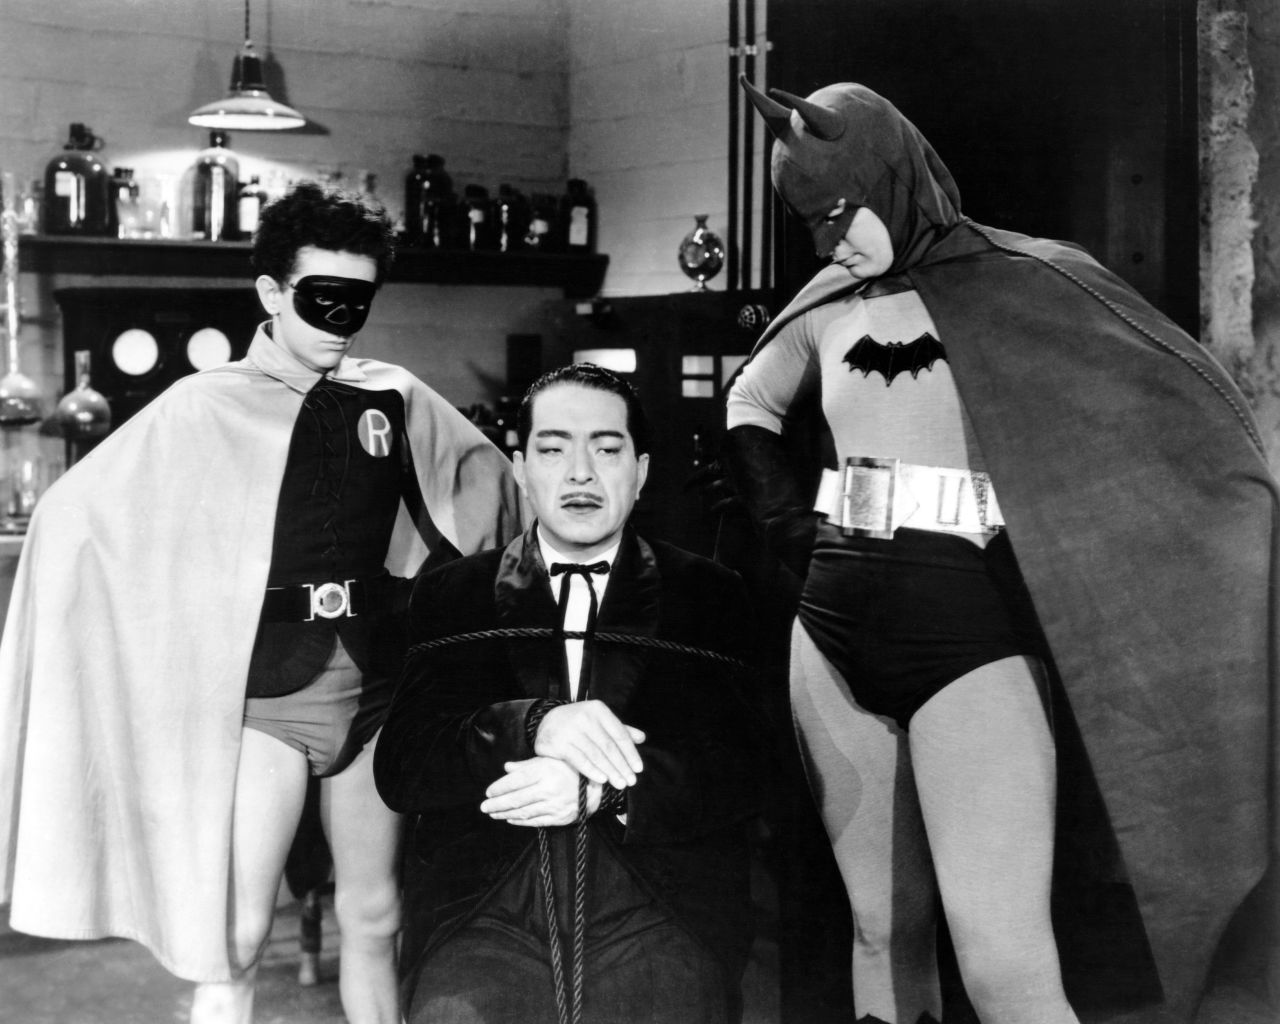 Four years later, "Batman" first hit the big screen as a 15-chapter movie serial. It had a strong anti-Japanese sentiment -- with Batman and Robin fighting a Japanese spy during World War II, complete with racial slurs -- so it's far from politically correct when viewed today. Lewis Wilson and an age-appropriate 16-year-old Douglas Croft were the first actors to play  the Dynamic Duo, and the serial's portrayal of faithful butler Alfred influenced the comics. (As for Robin, he  was introduced in the comics in 1940.)